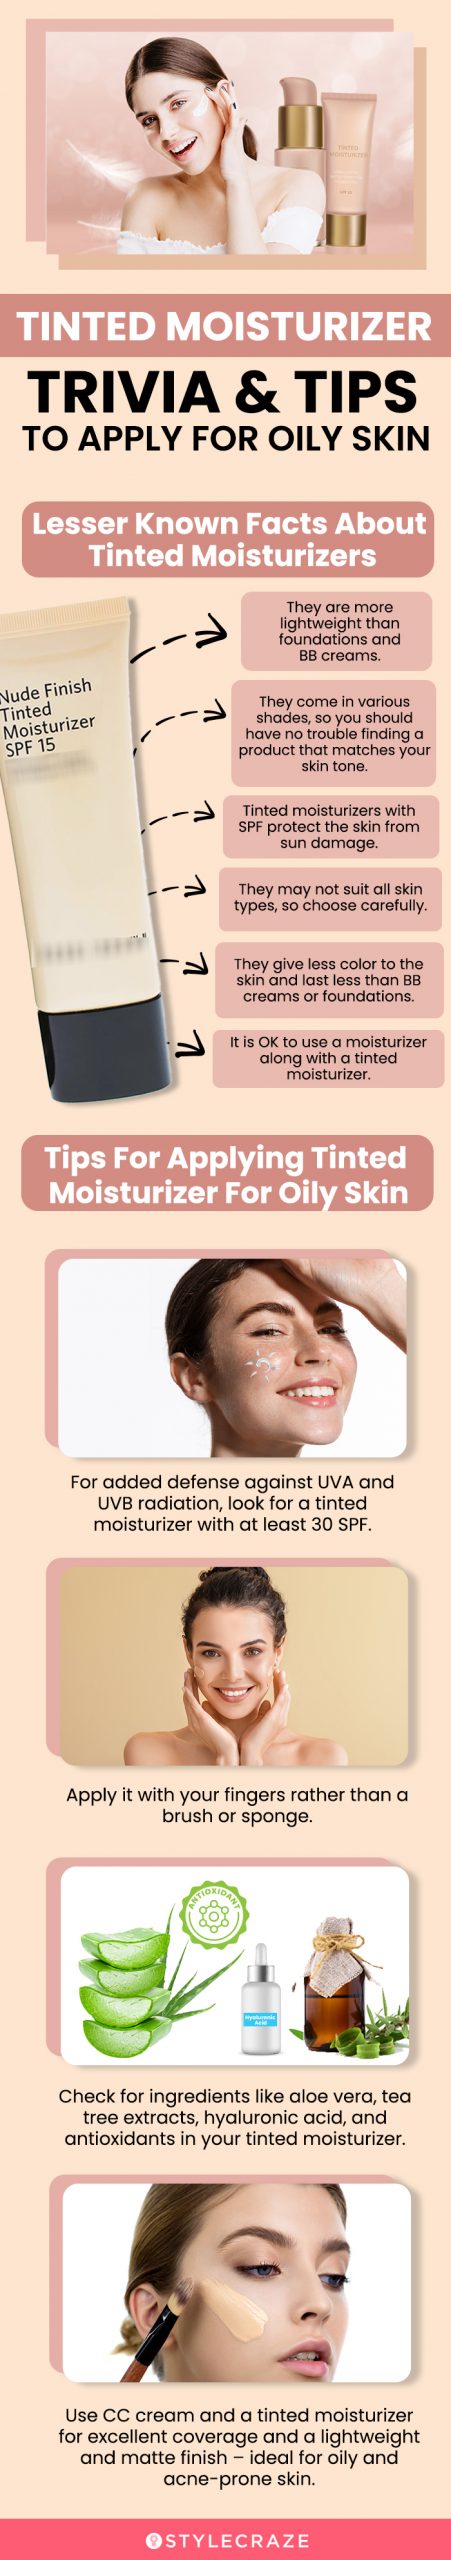 Tinted Moisturizer – Trivia & Tips To Apply For Oily Skin (infographic)